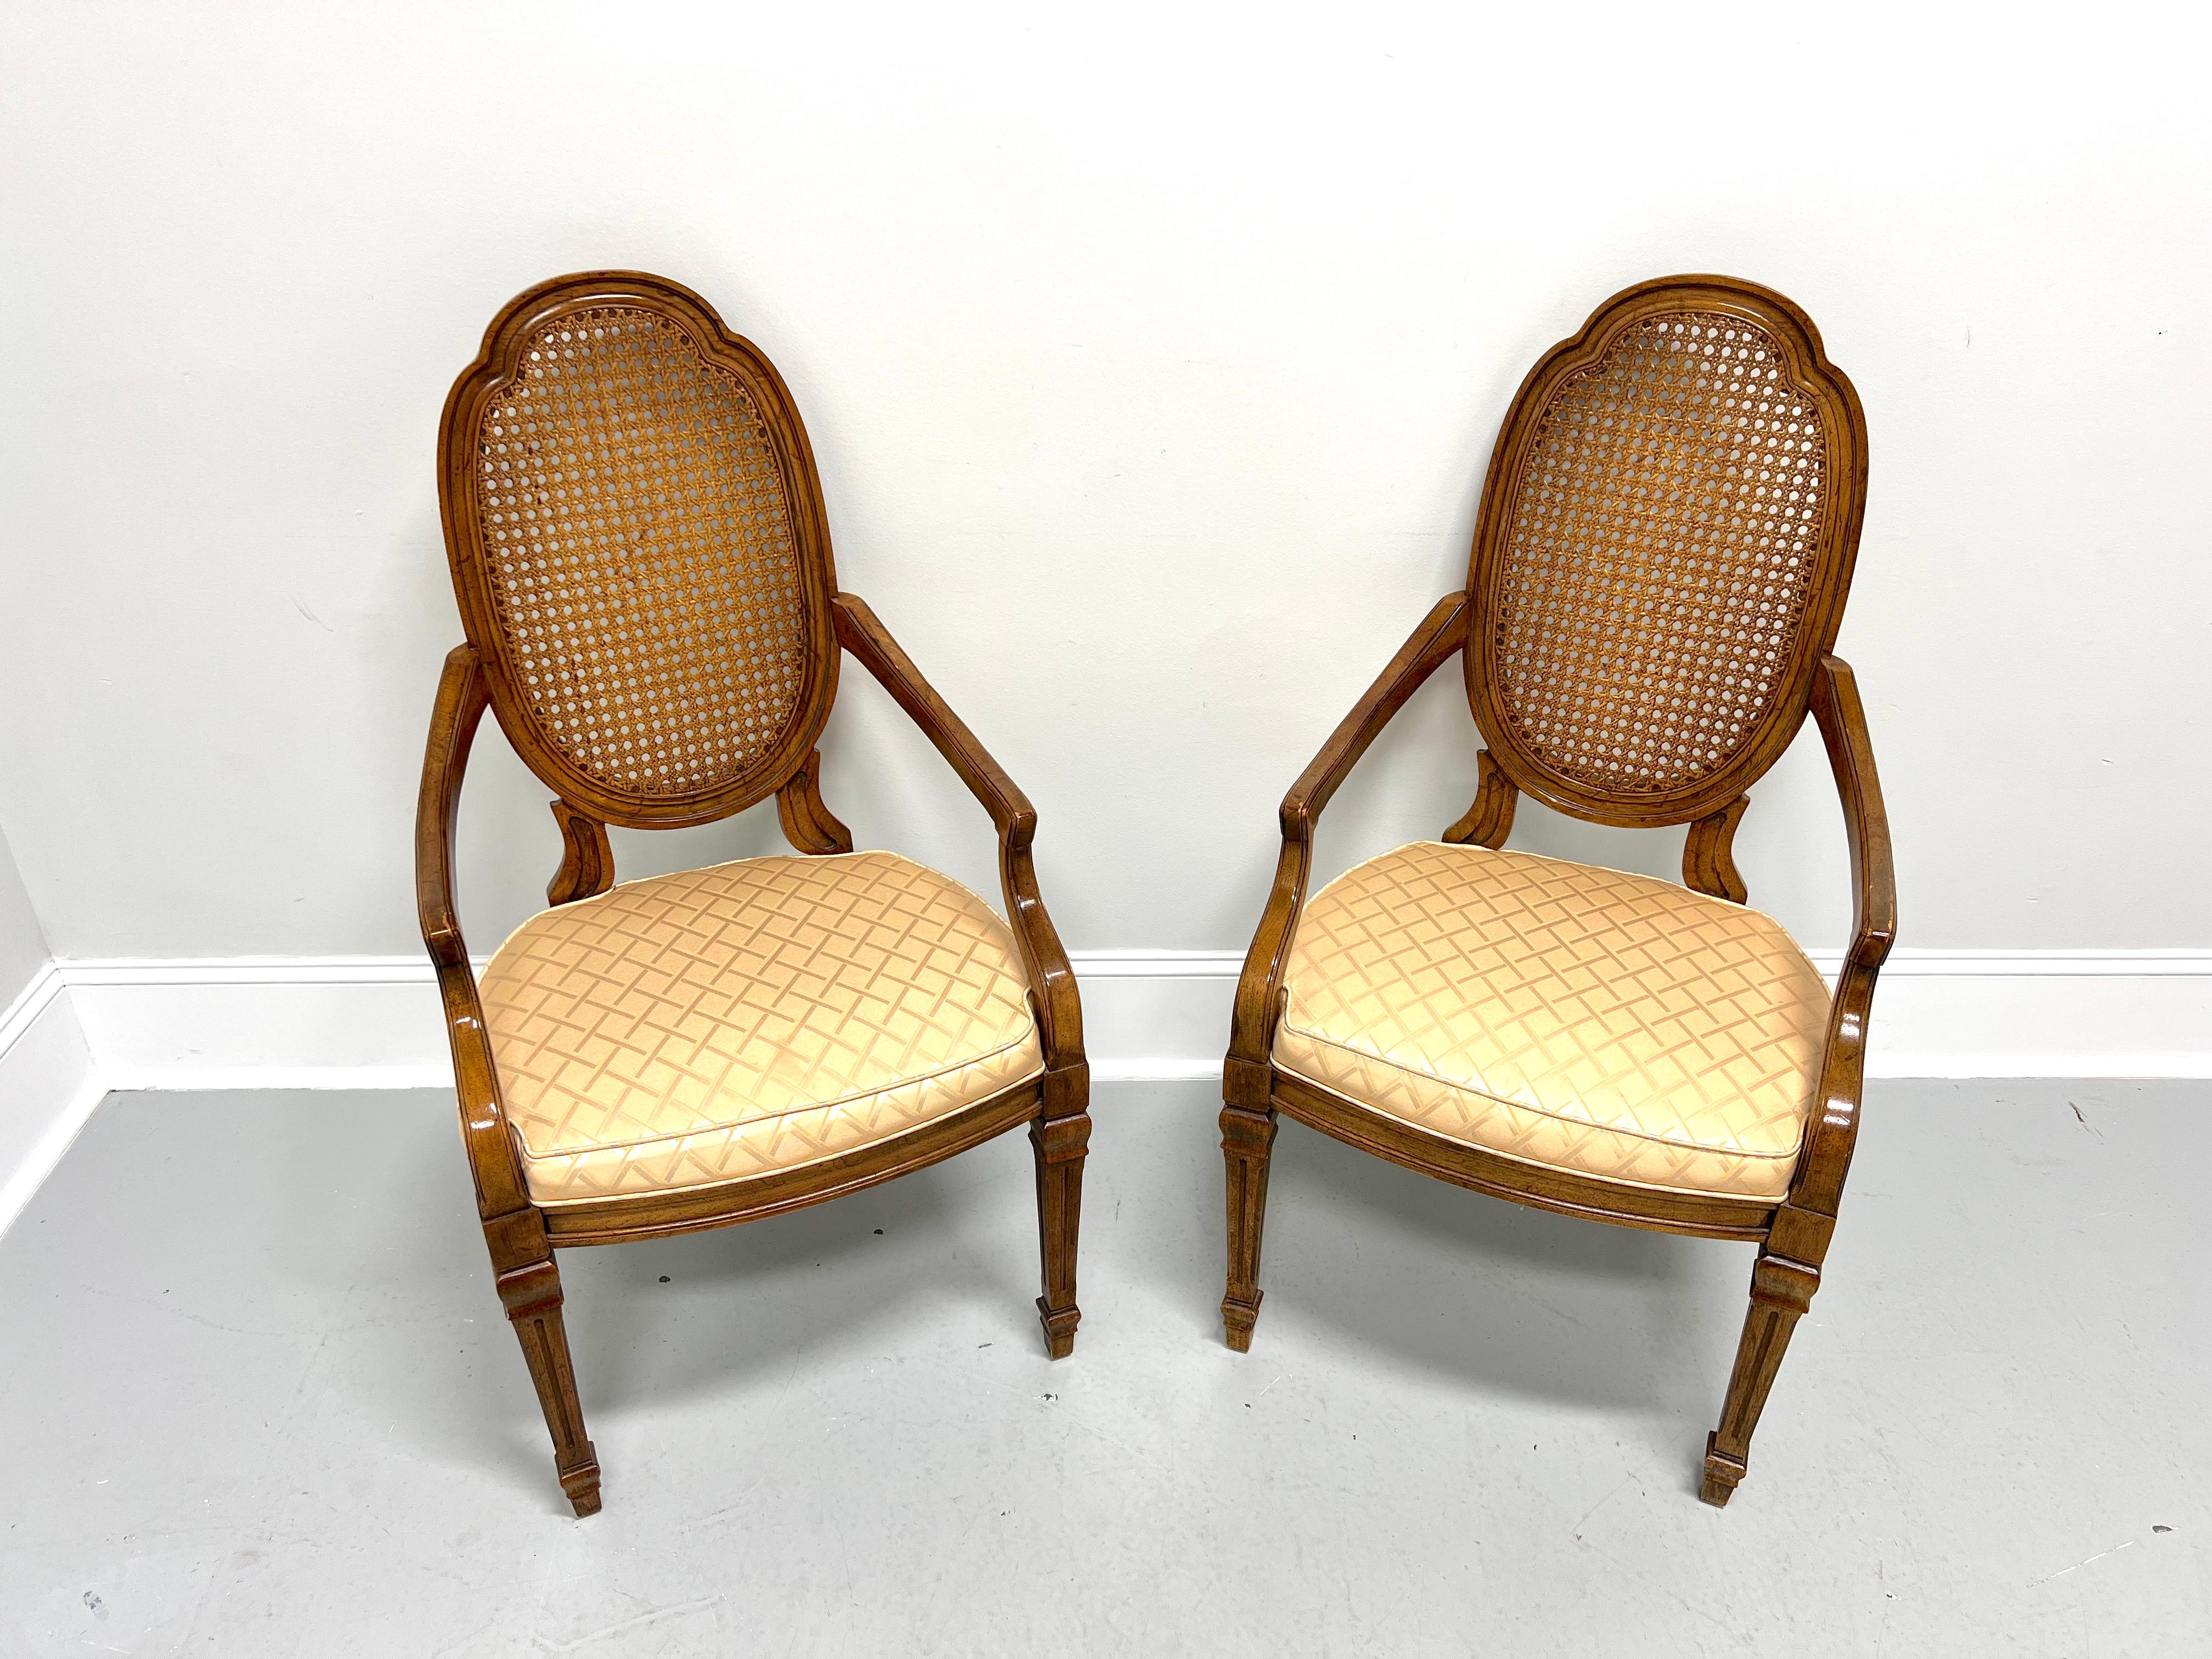 A pair of French Provincial Louis XVI style dining armchairs by Drexel Heritage. Walnut with a slightly distressed finish, carved oval shield-like caned backs, sloping straight arms with curved supports, gold color diamond pattern fabric upholstered